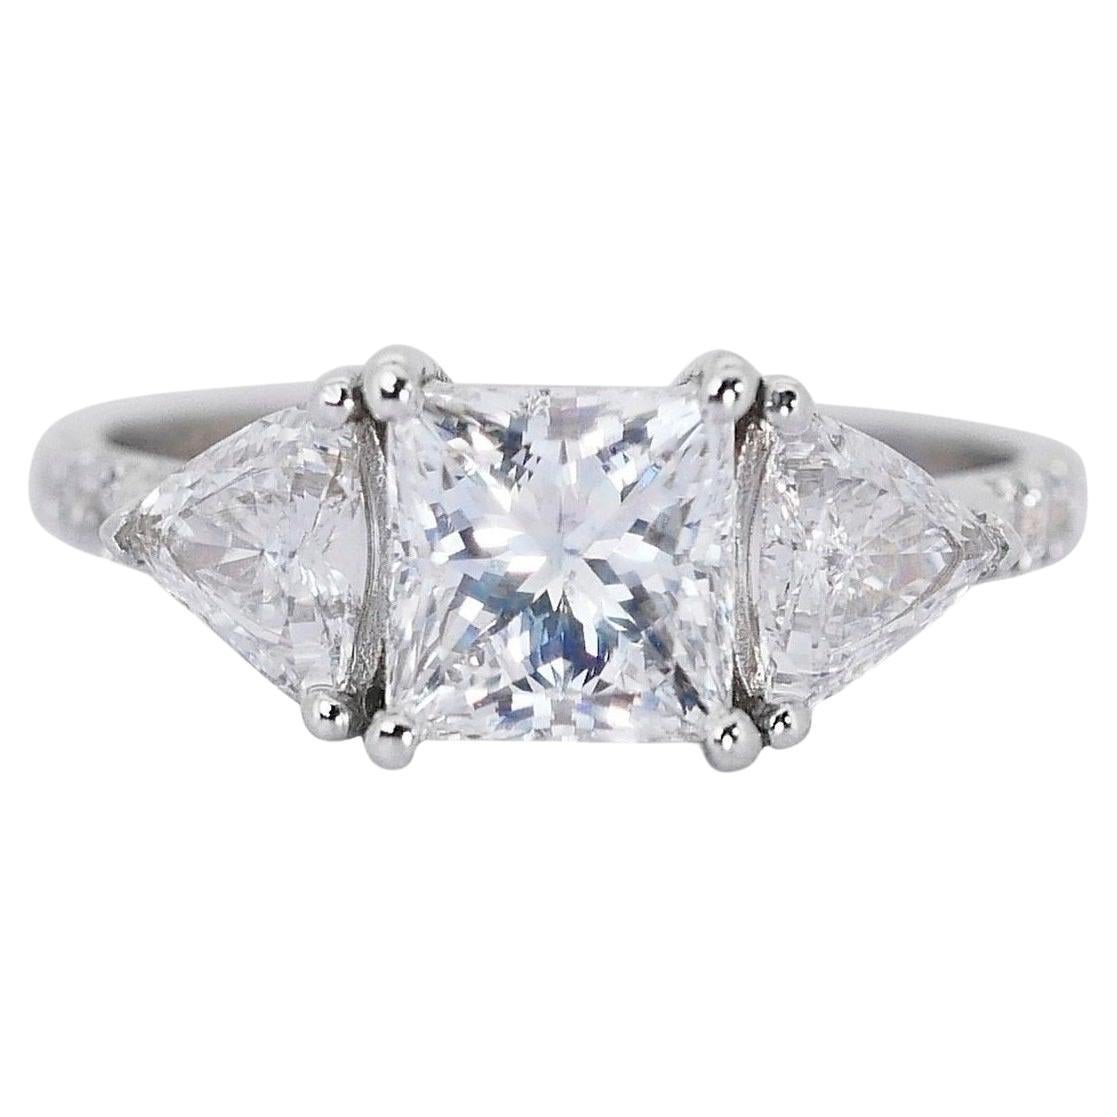 Luminous 2.59ct Diamonds 3-Stone Ring in 18k White Gold - GIA Certified For Sale